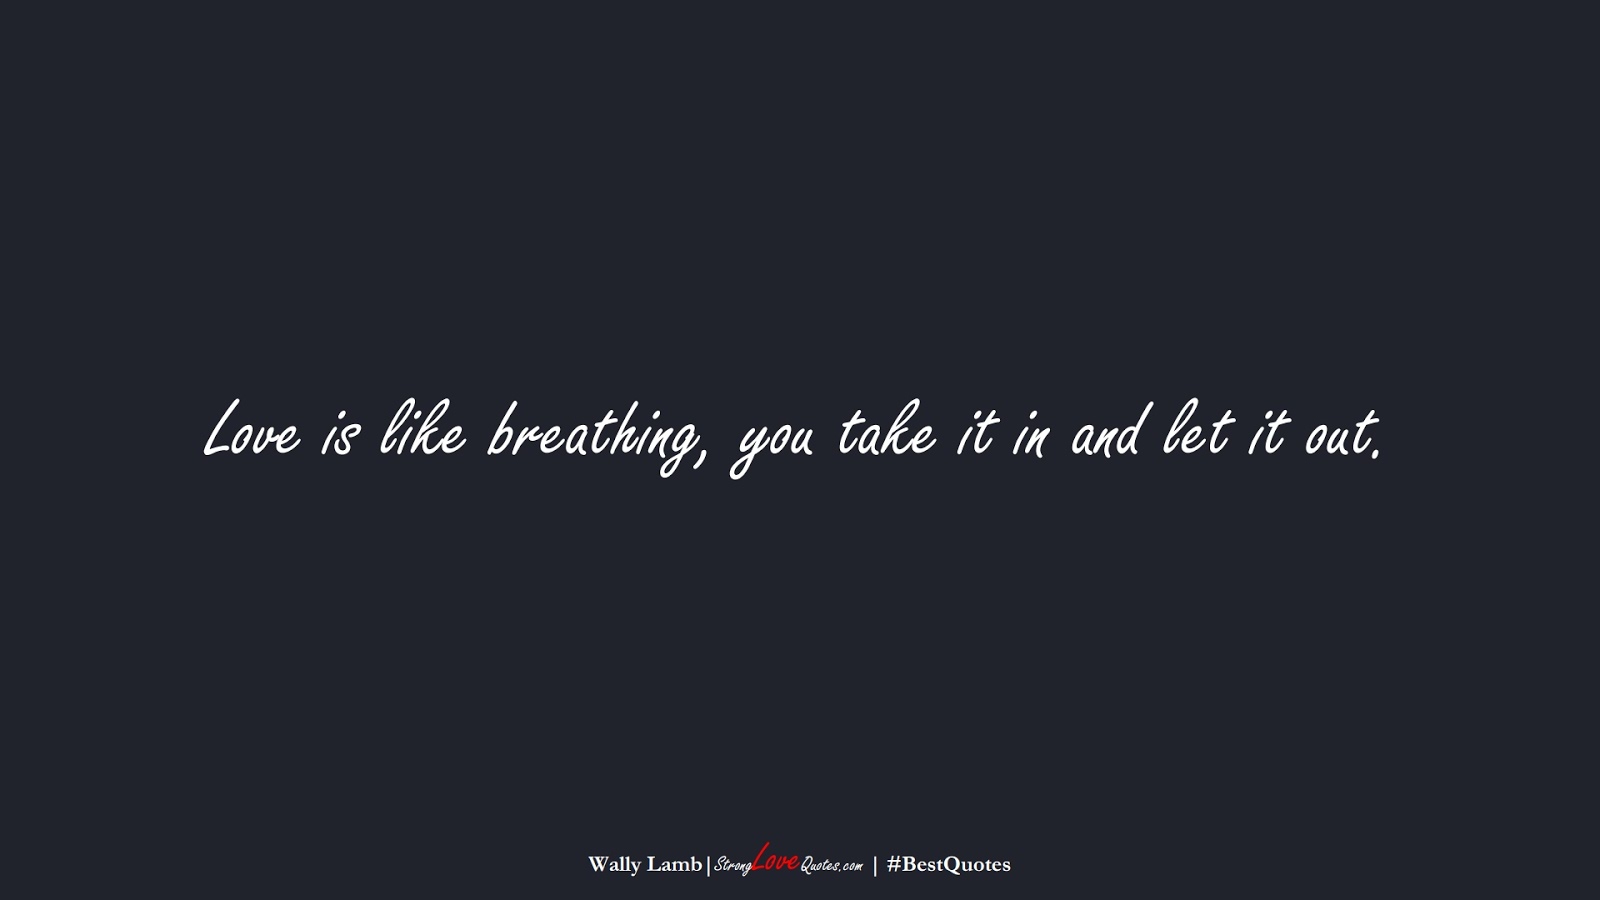 Love is like breathing, you take it in and let it out. (Wally Lamb);  #BestQuotes